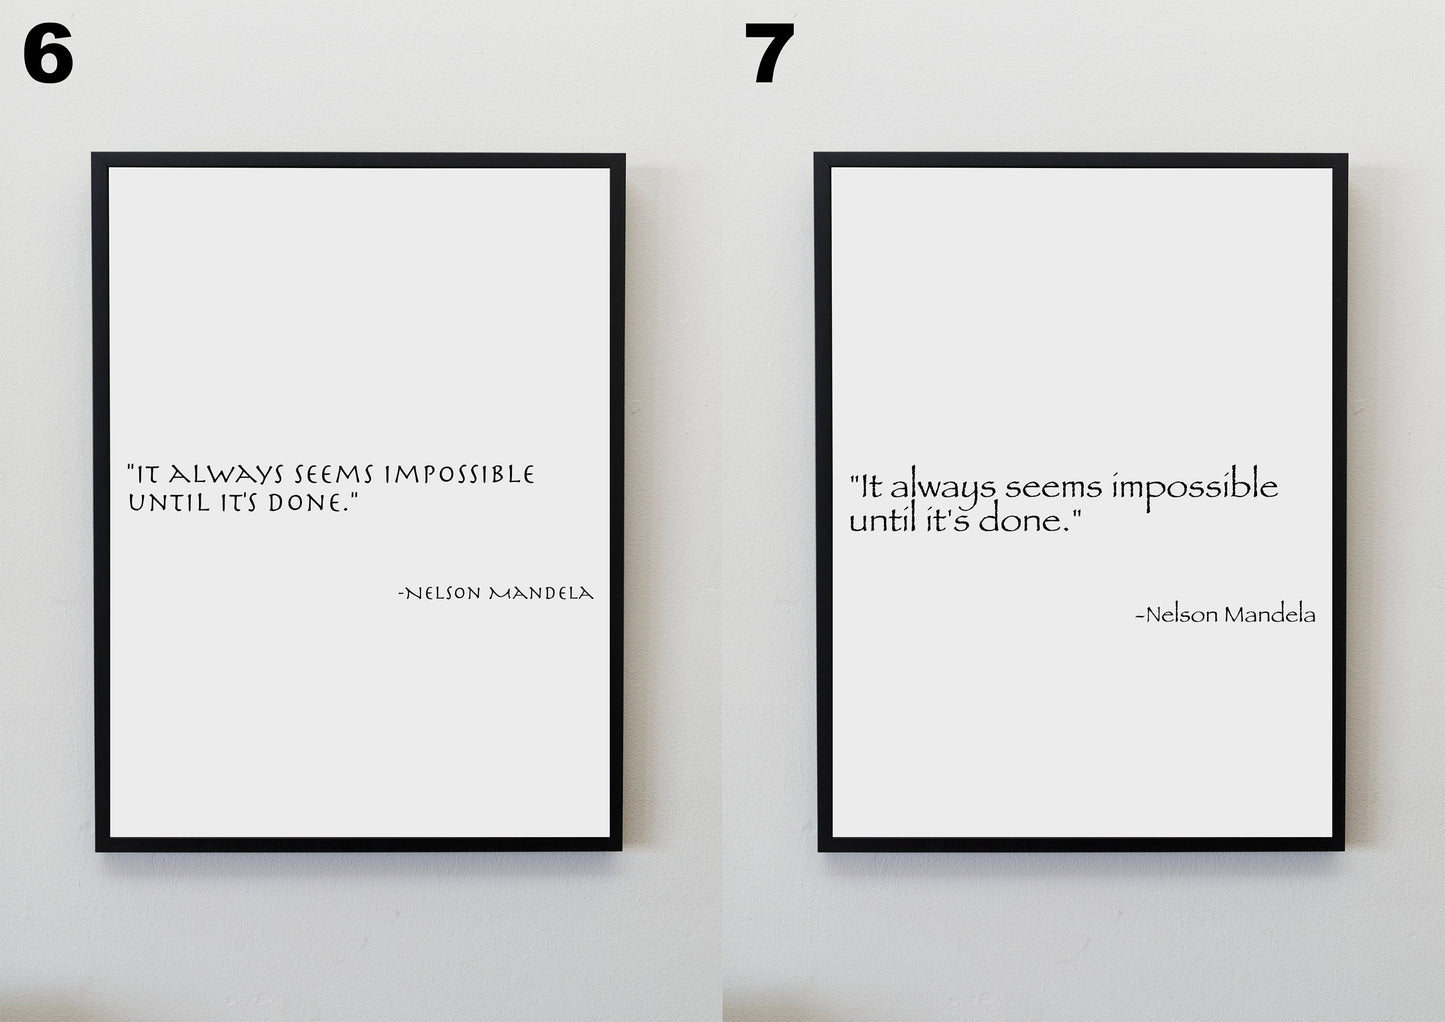 Inspirational Motivational Quote by Nelson Mandela Print with different font options